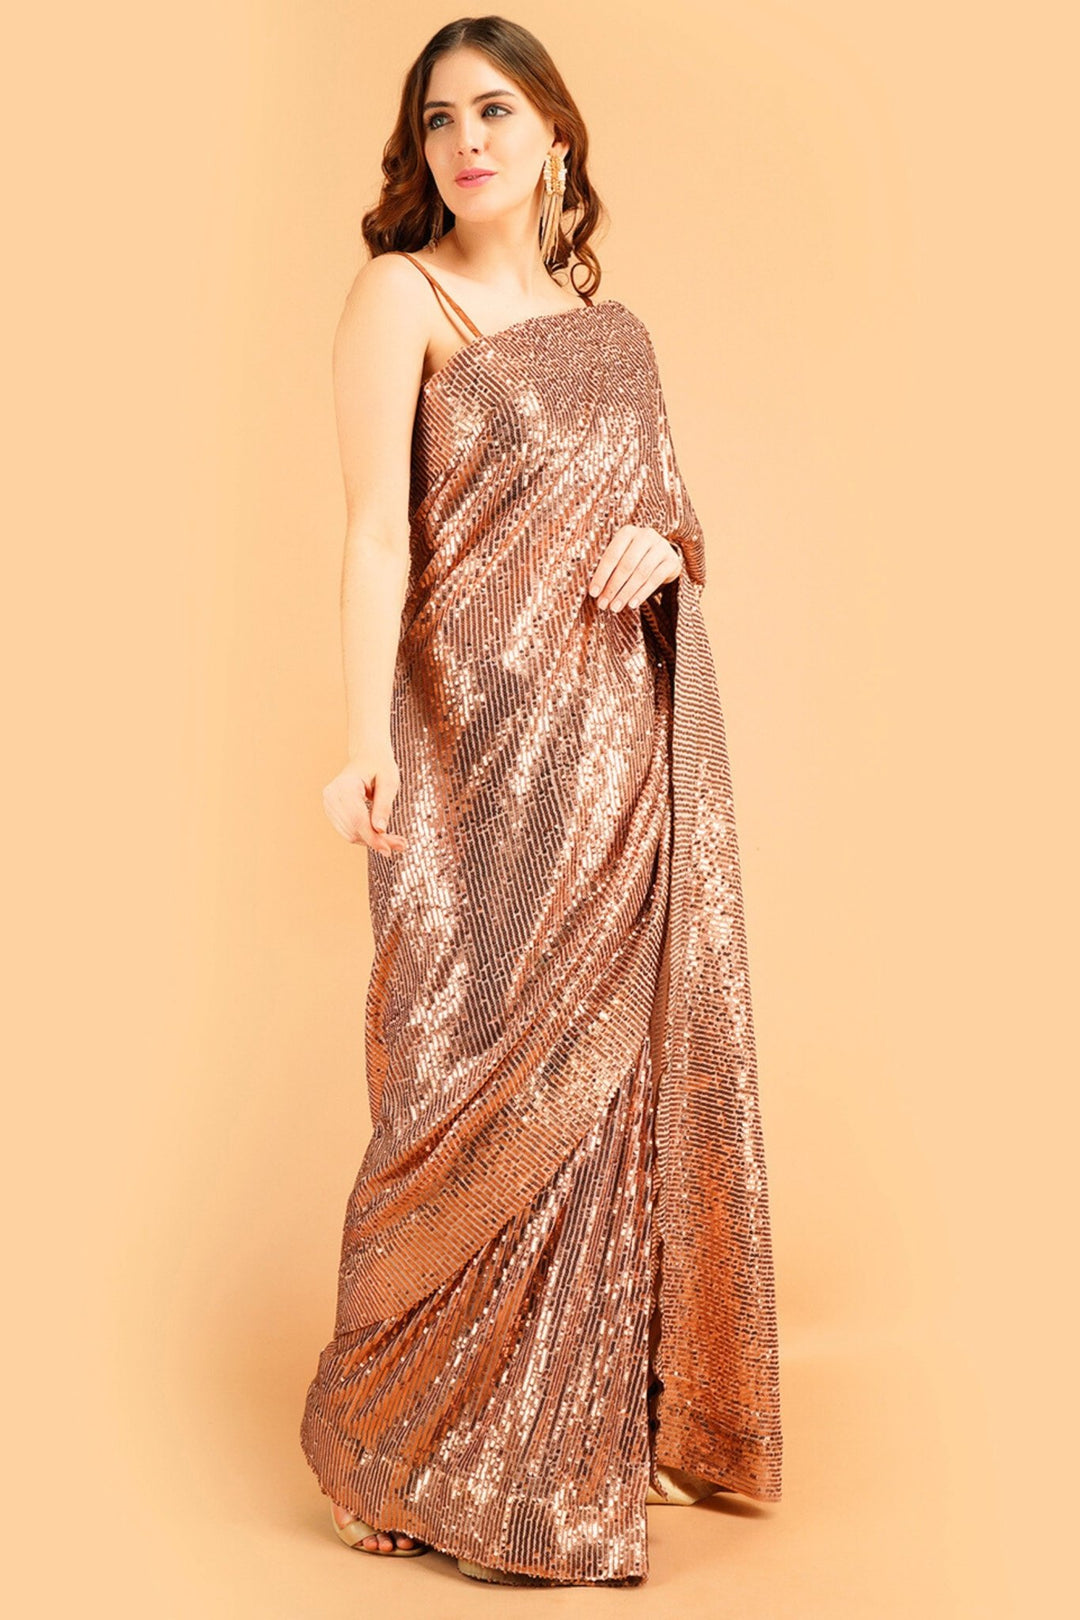 Golden Sequin Saree - A Must-Have for Every Fashionista